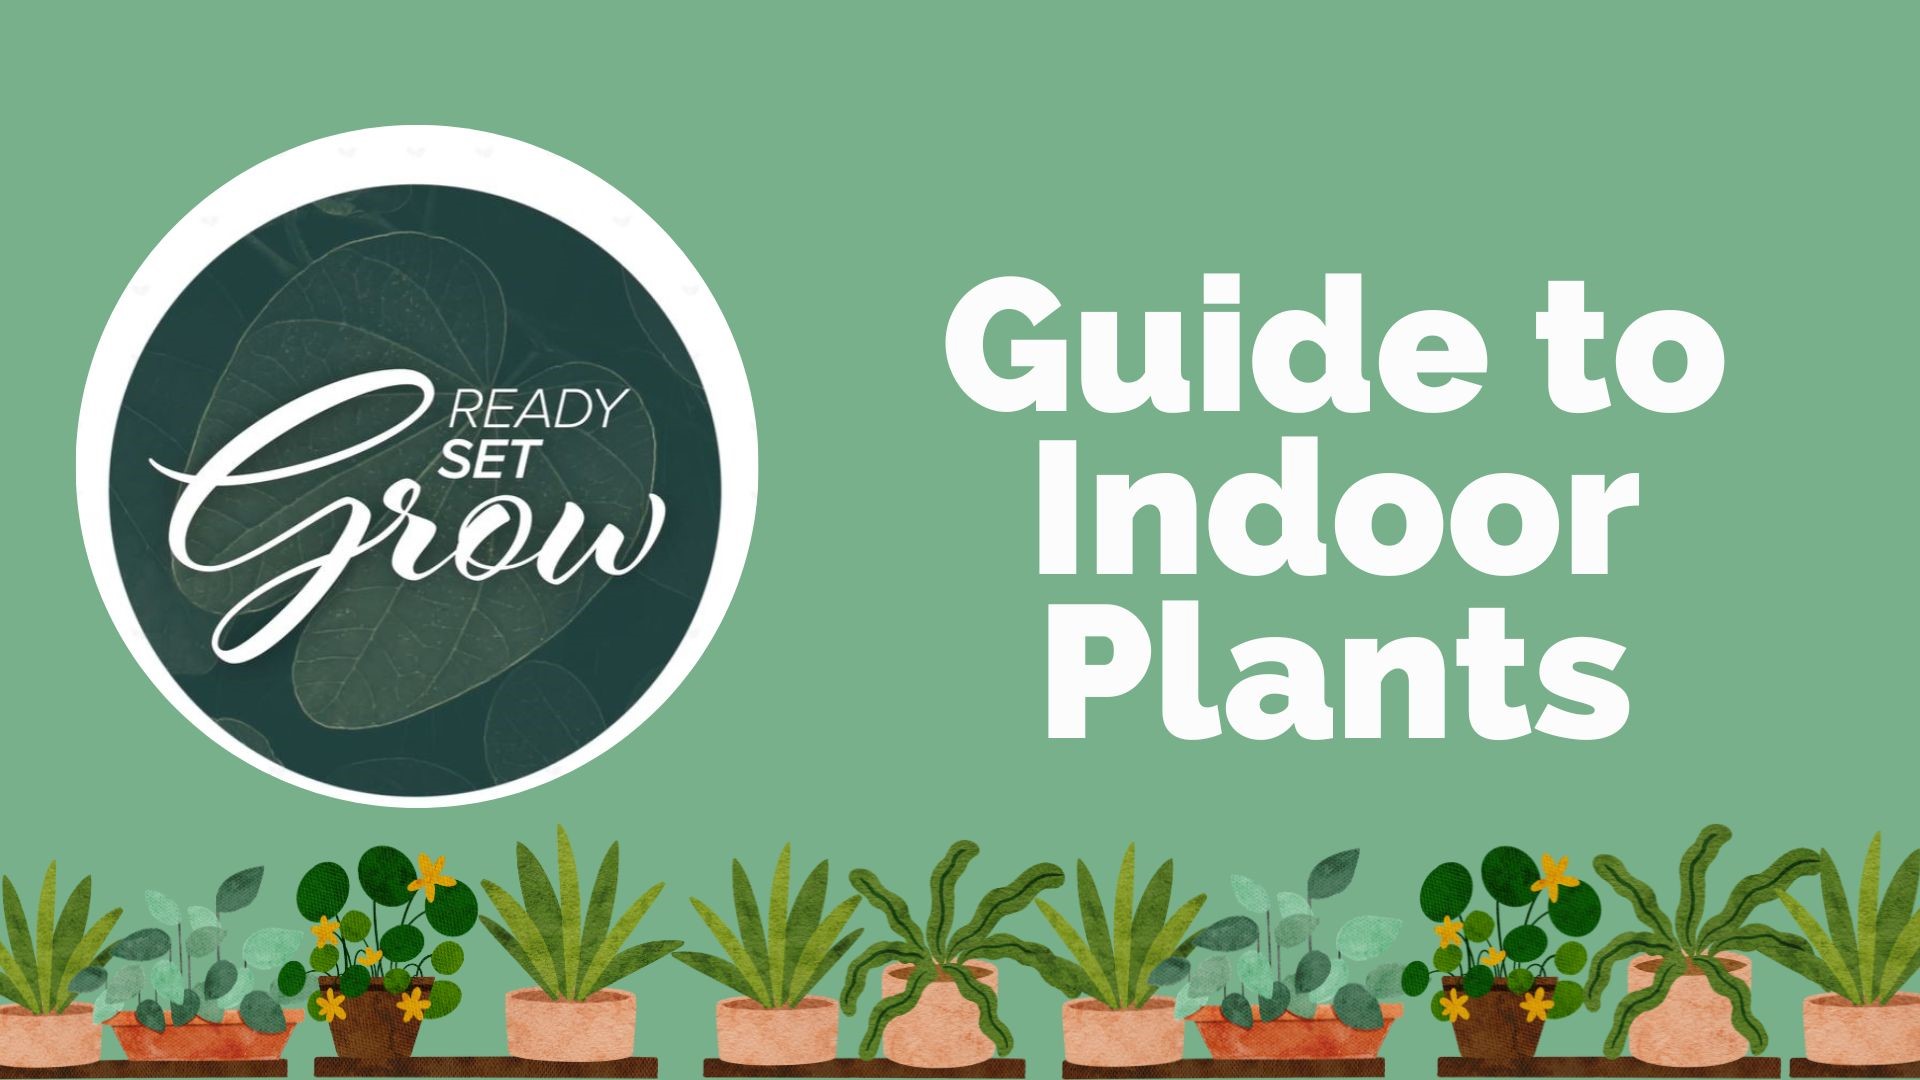 A complete guide to keeping your indoor plants alive and thriving. From the best low-light plants to creating a terrarium, plus the health benefits of house plants.